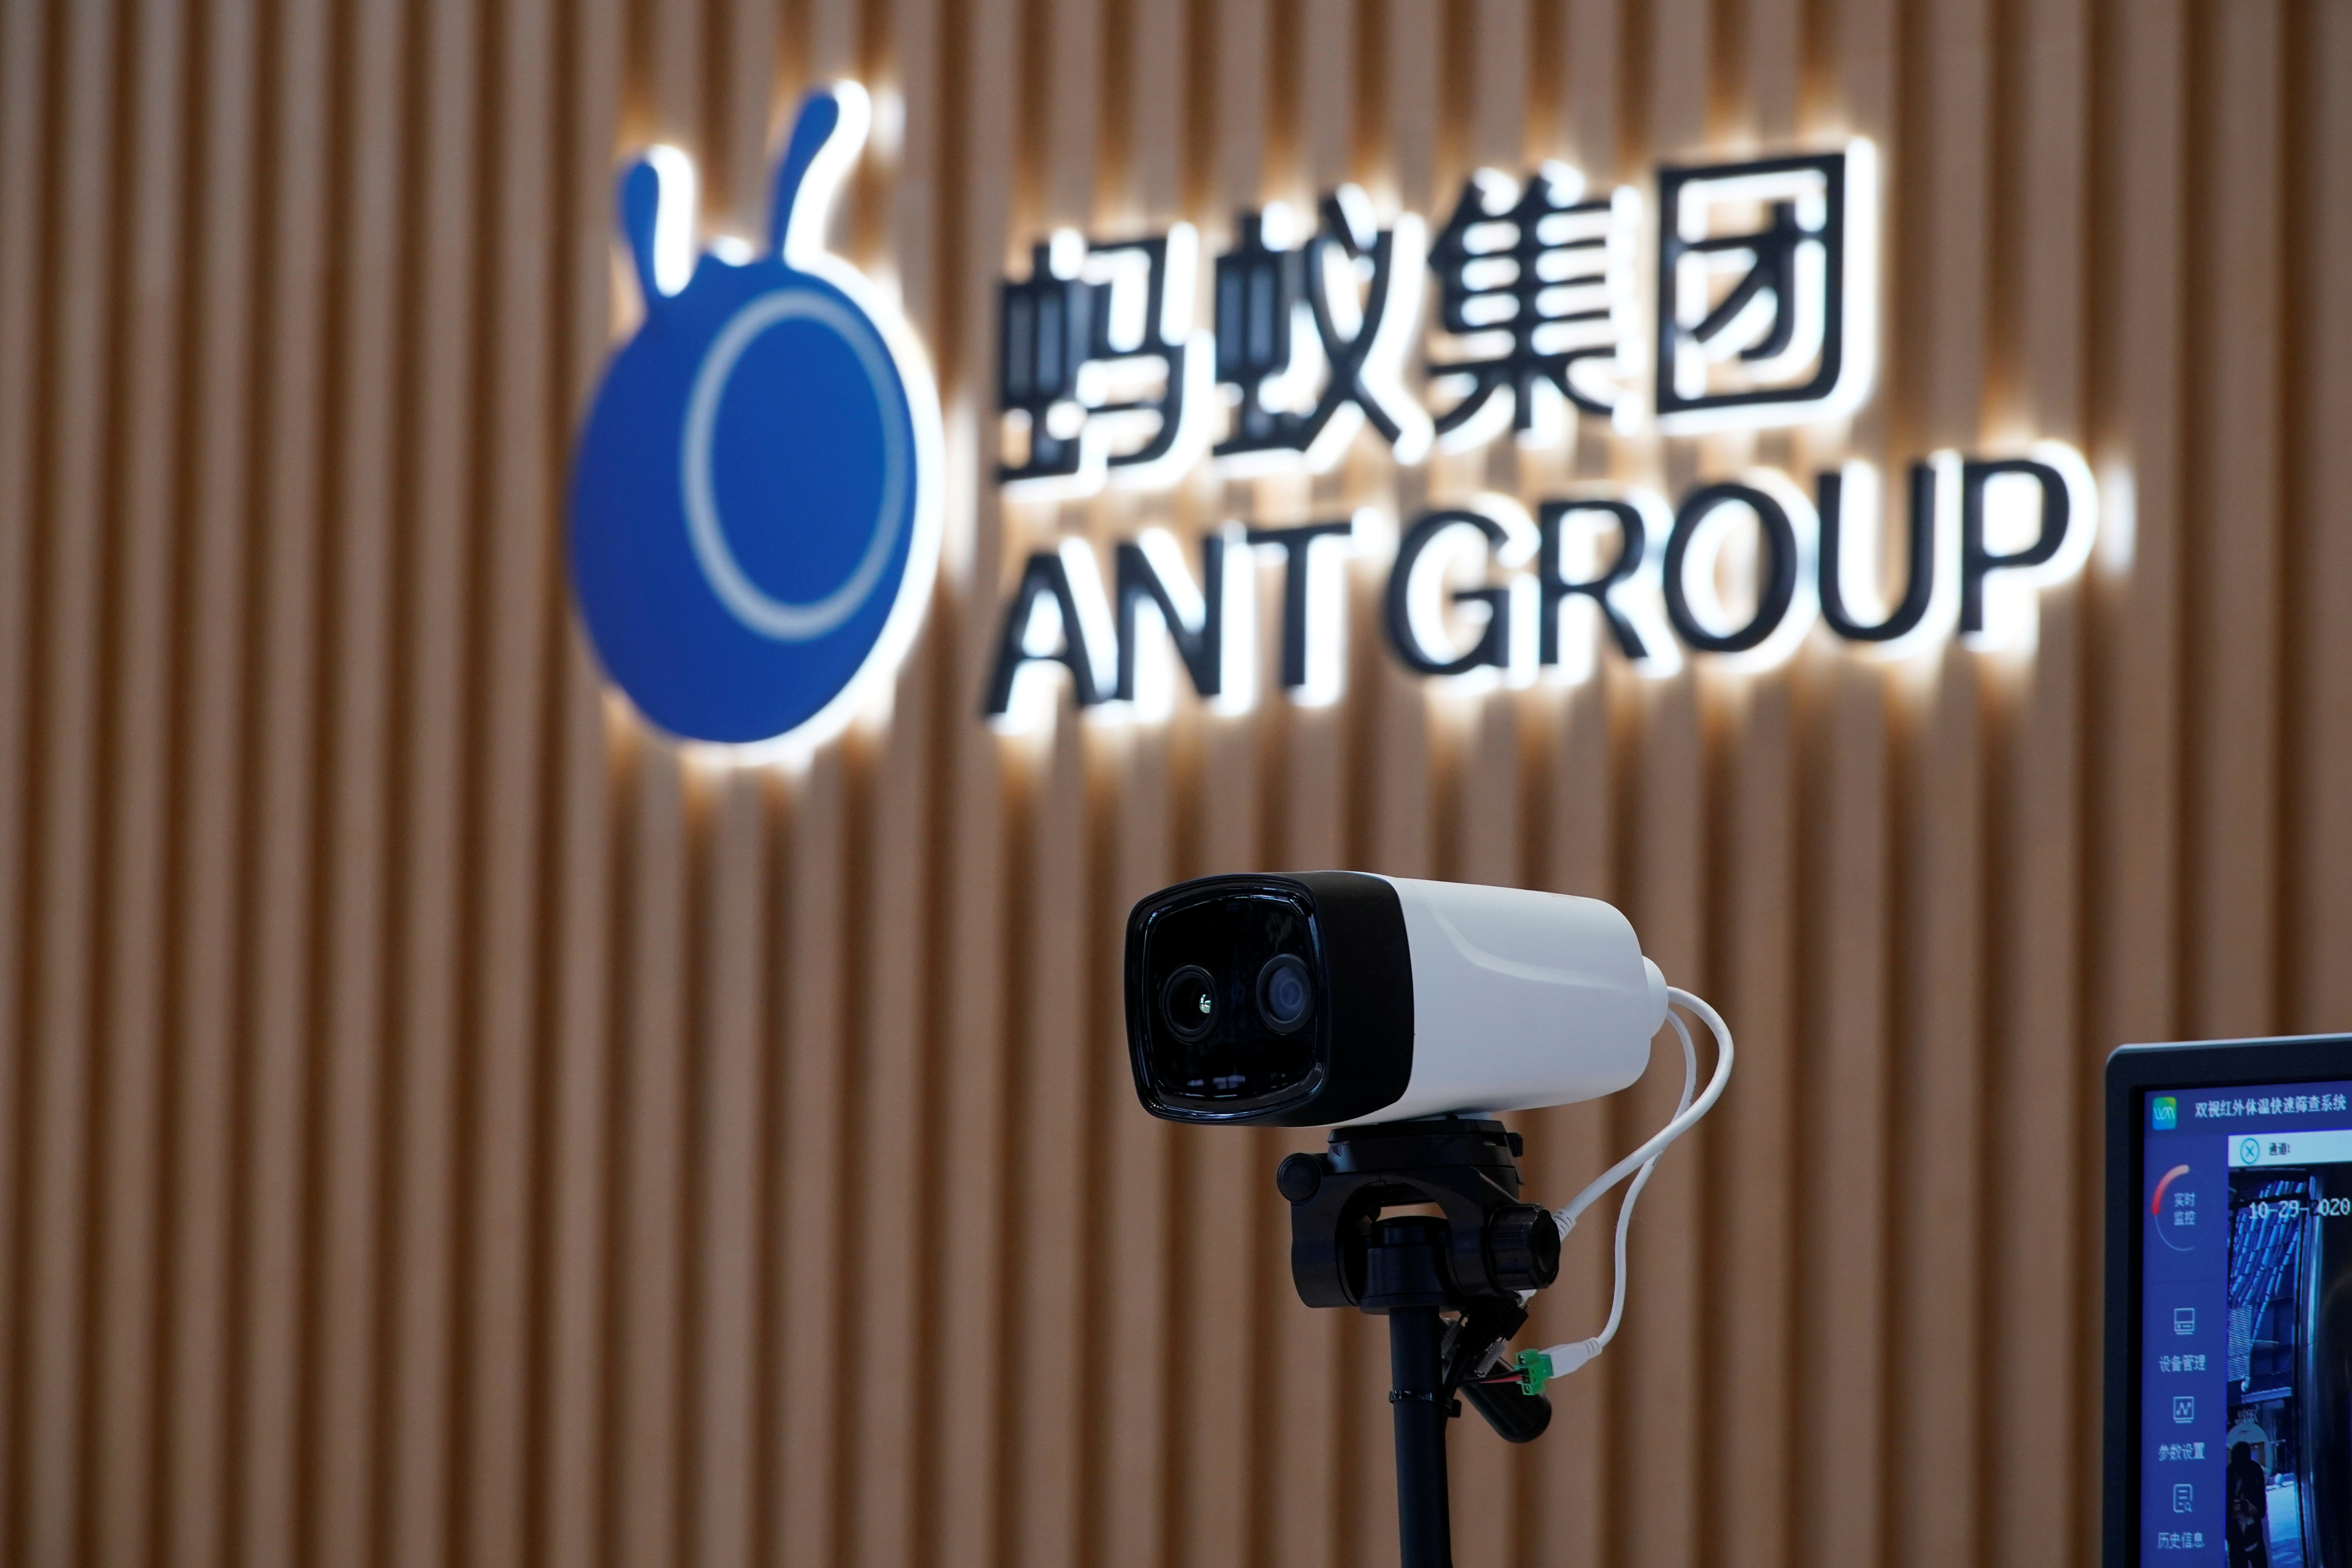 A thermal imaging camera is seen in front of a logo of Ant Group at the headquarters of Ant Group, an affiliate of Alibaba, in Hangzhou